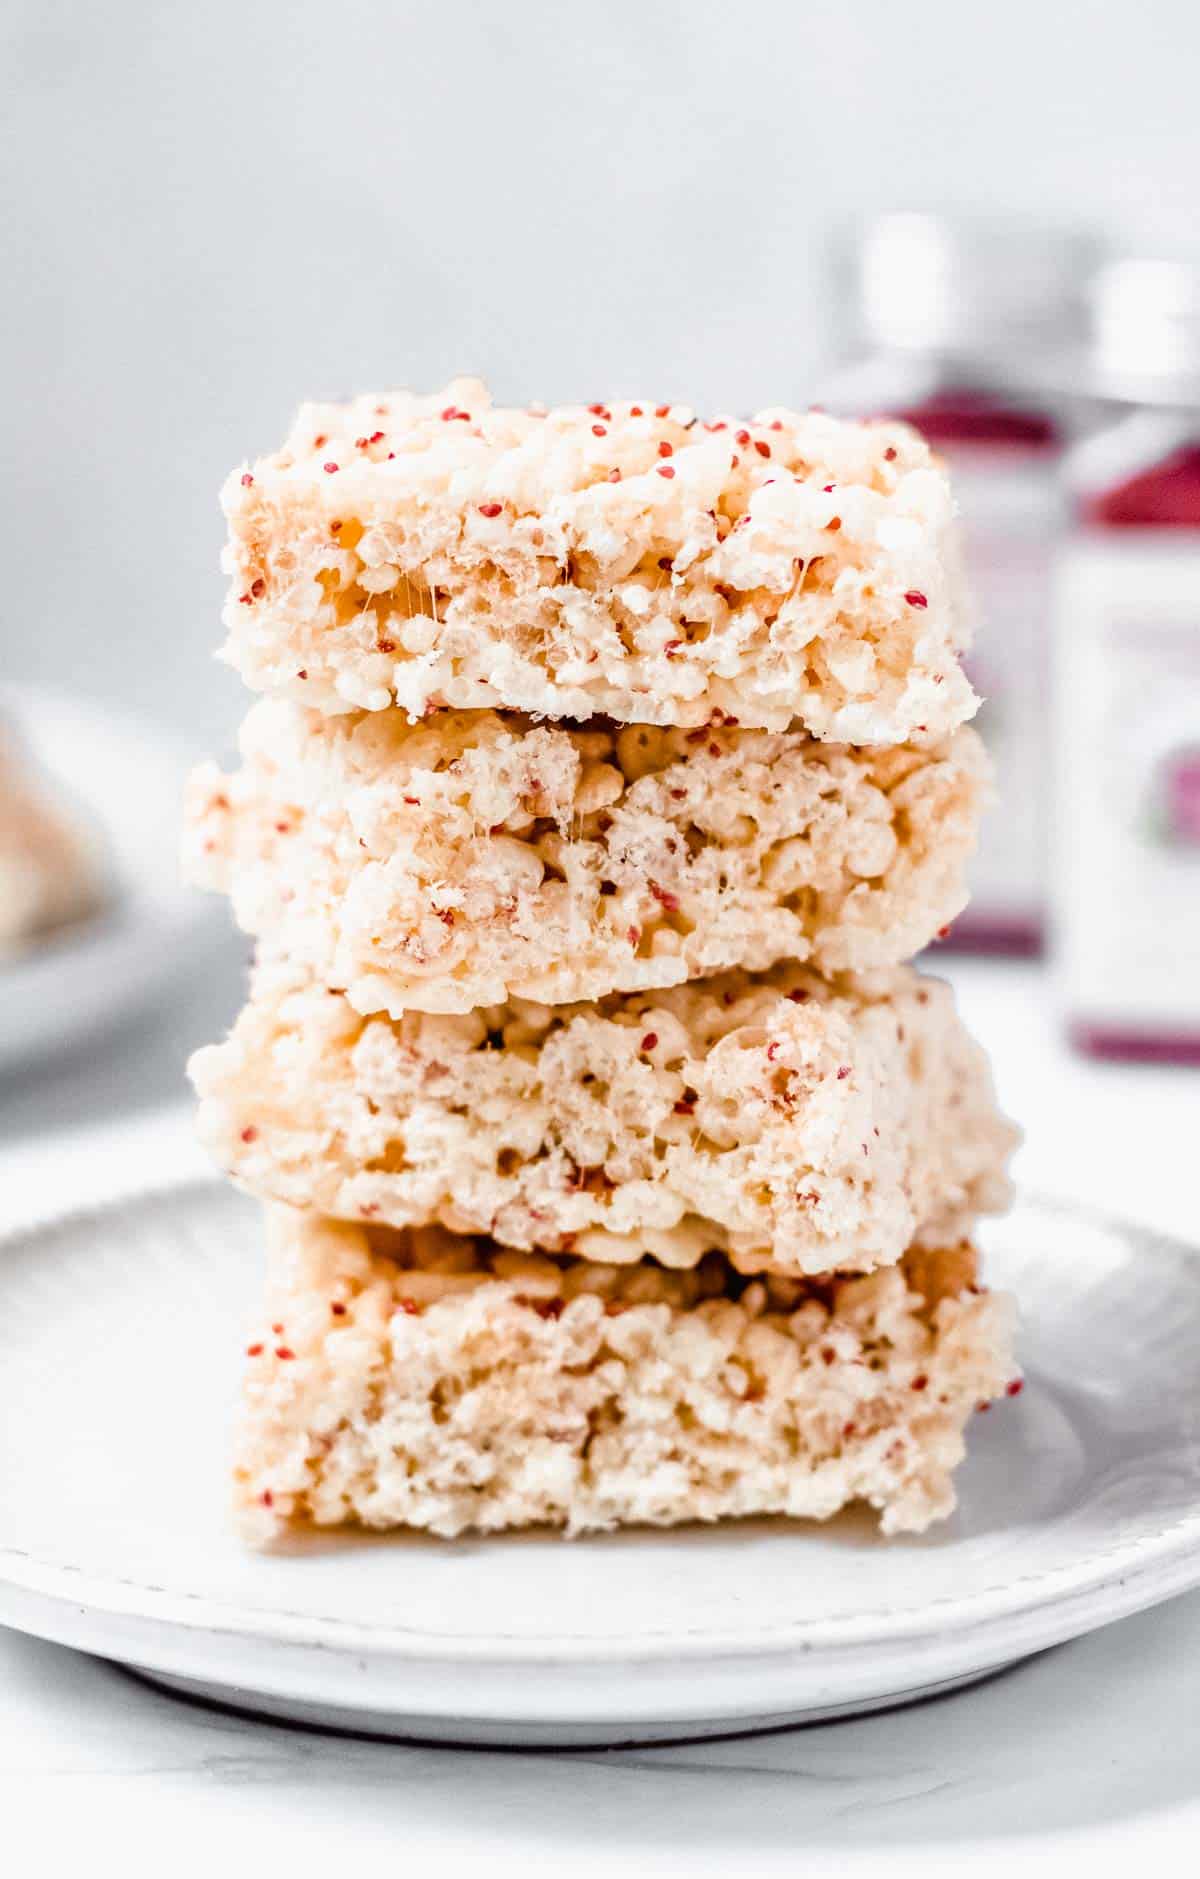 Stack of 4 crispy cereal treats with cranberry seeds in a white plate